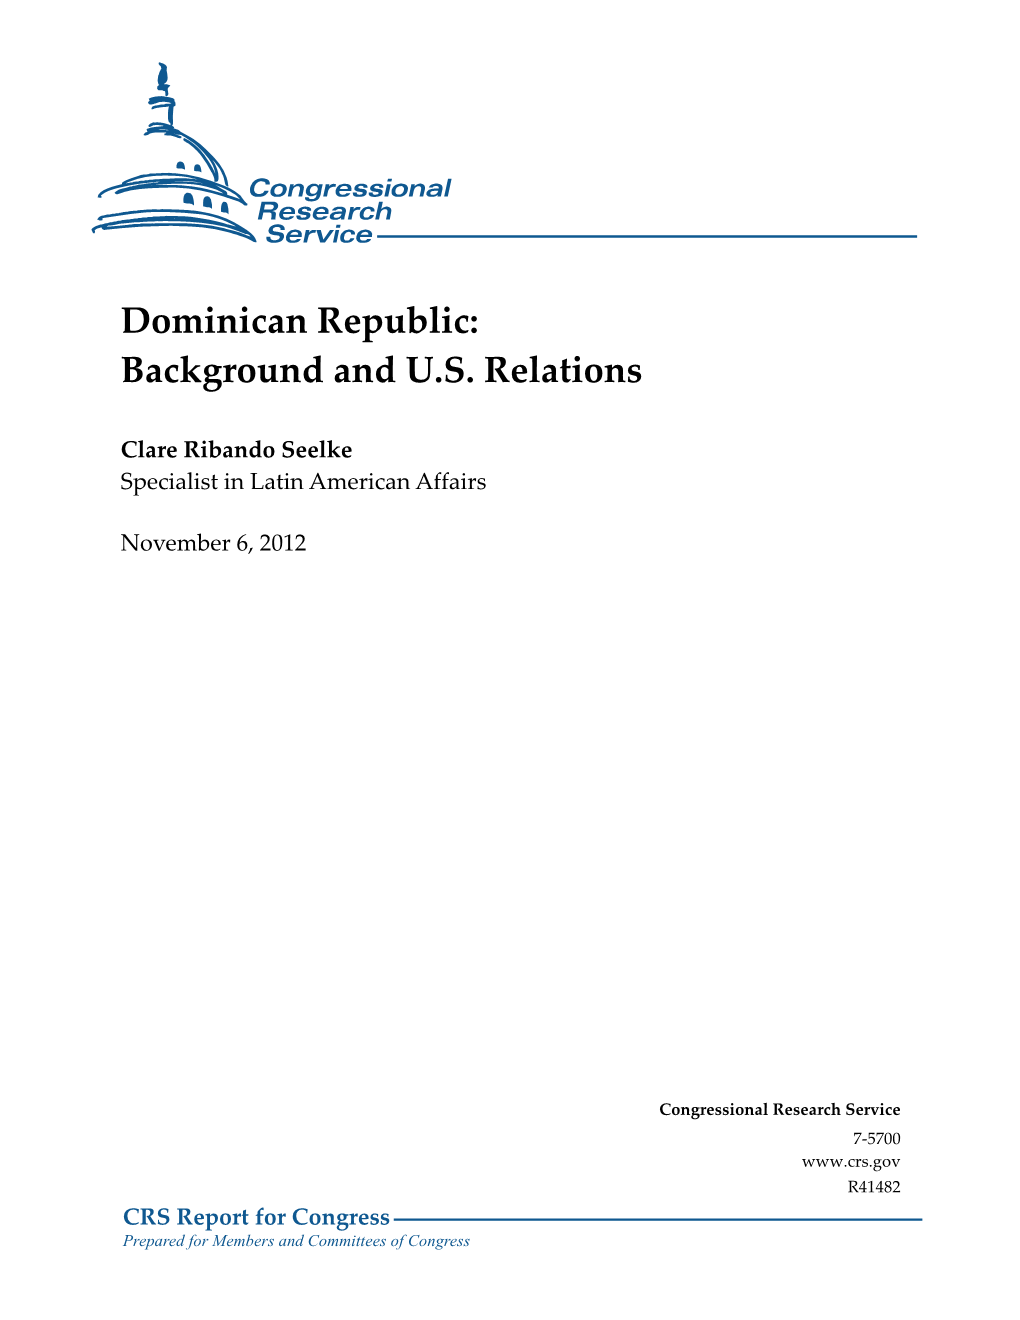 Dominican Republic: Background and U.S